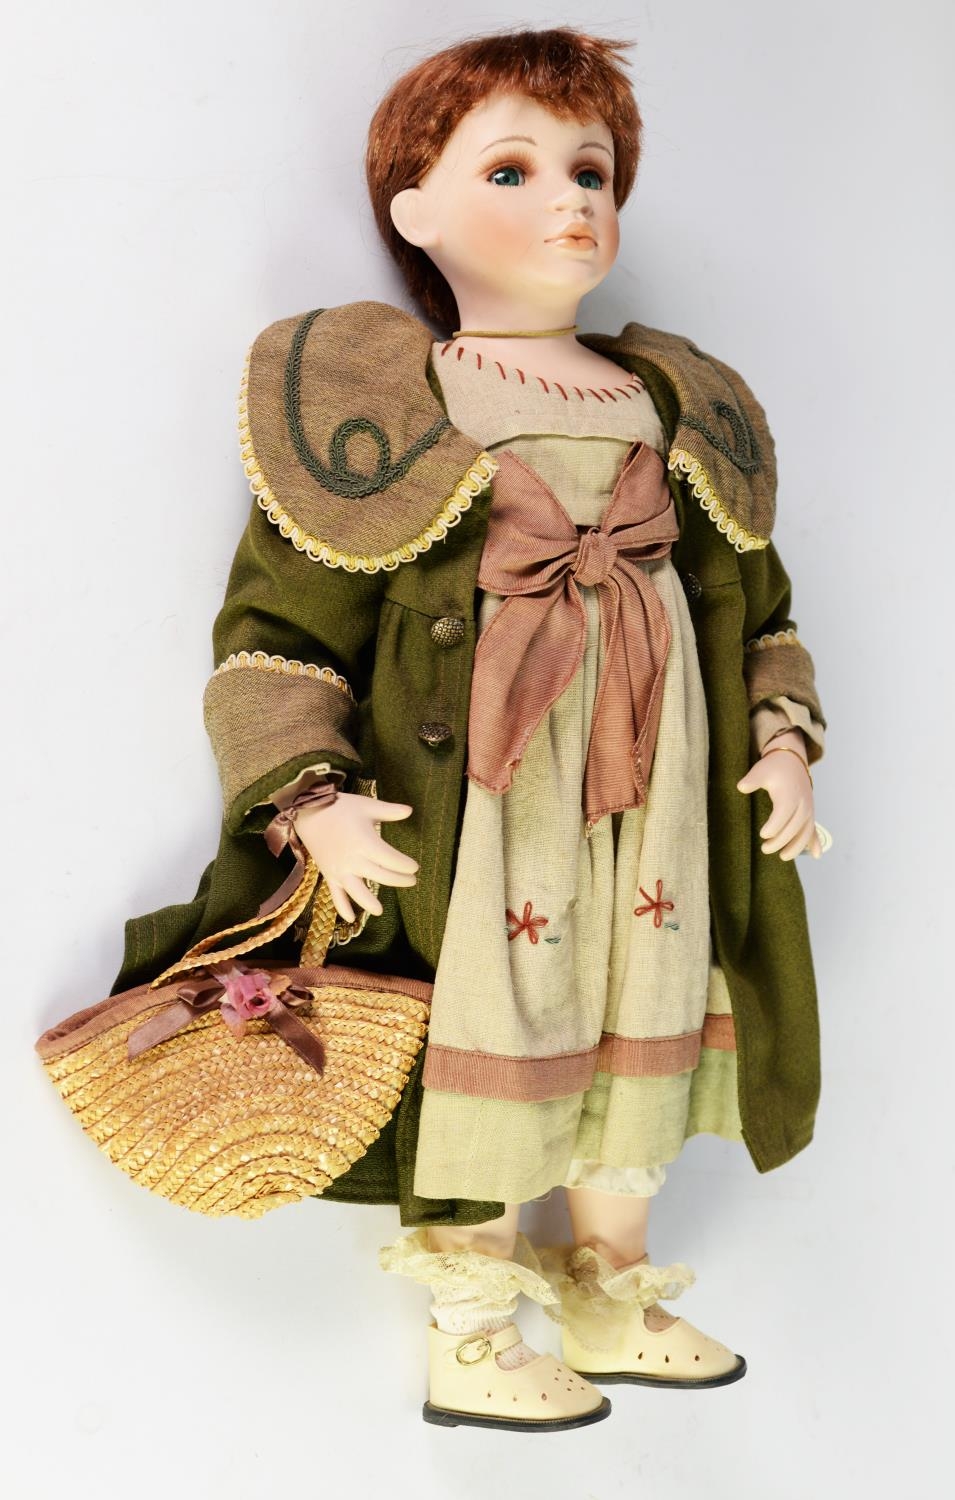 BOXED LEONARDO COLLECTION CERAMIC HEADED COLLECTOR'S DOLL with pigtails and holding a teddy bear, - Image 4 of 4